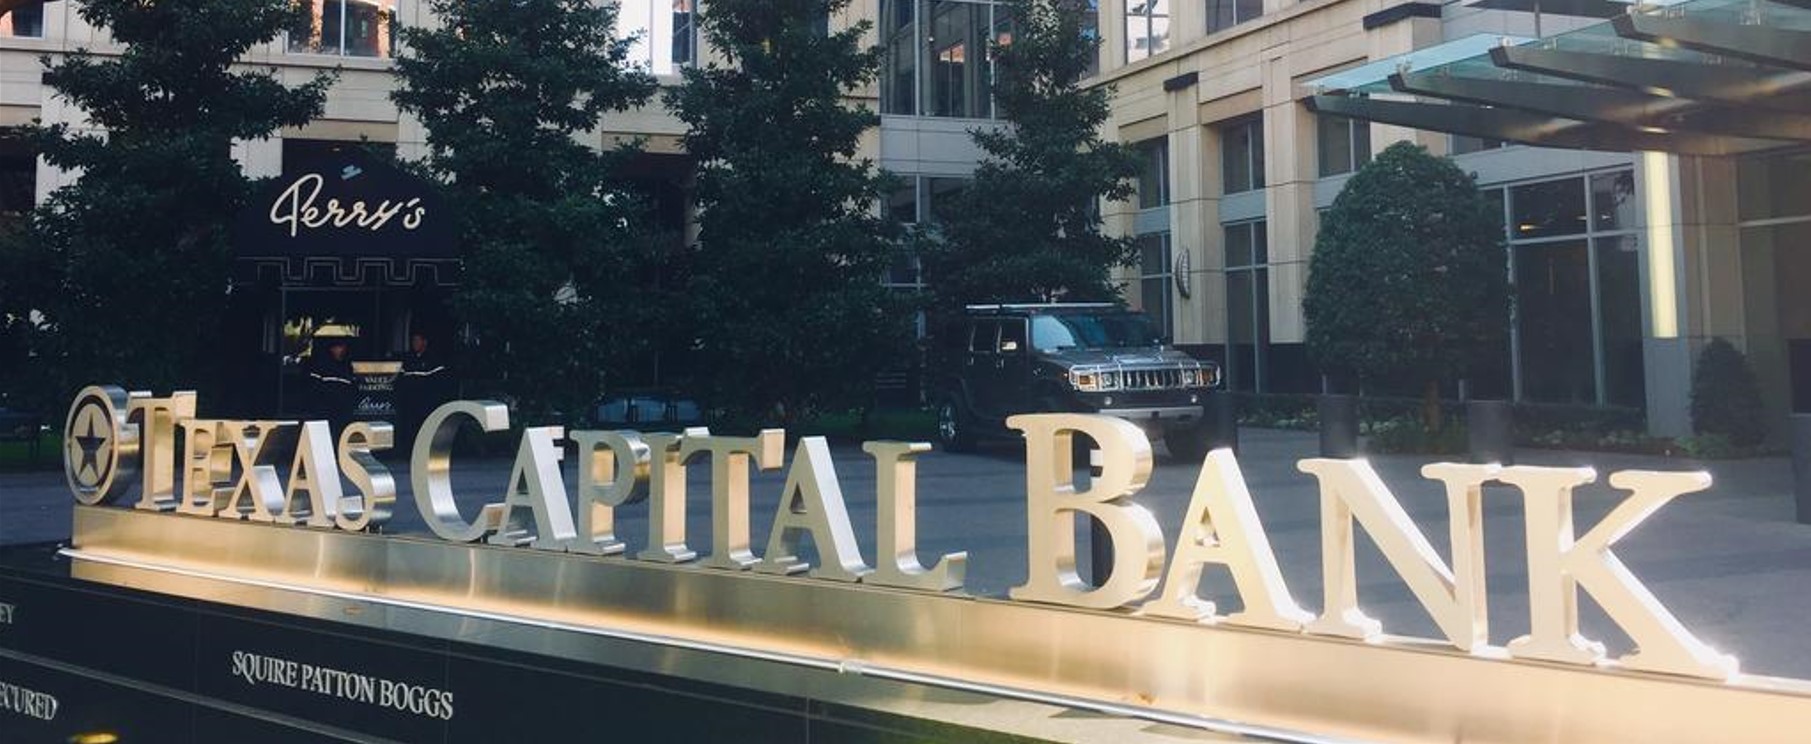 In front of the bank building, a Texas Capital Bank sign is shown alongside a few trees and a black car.